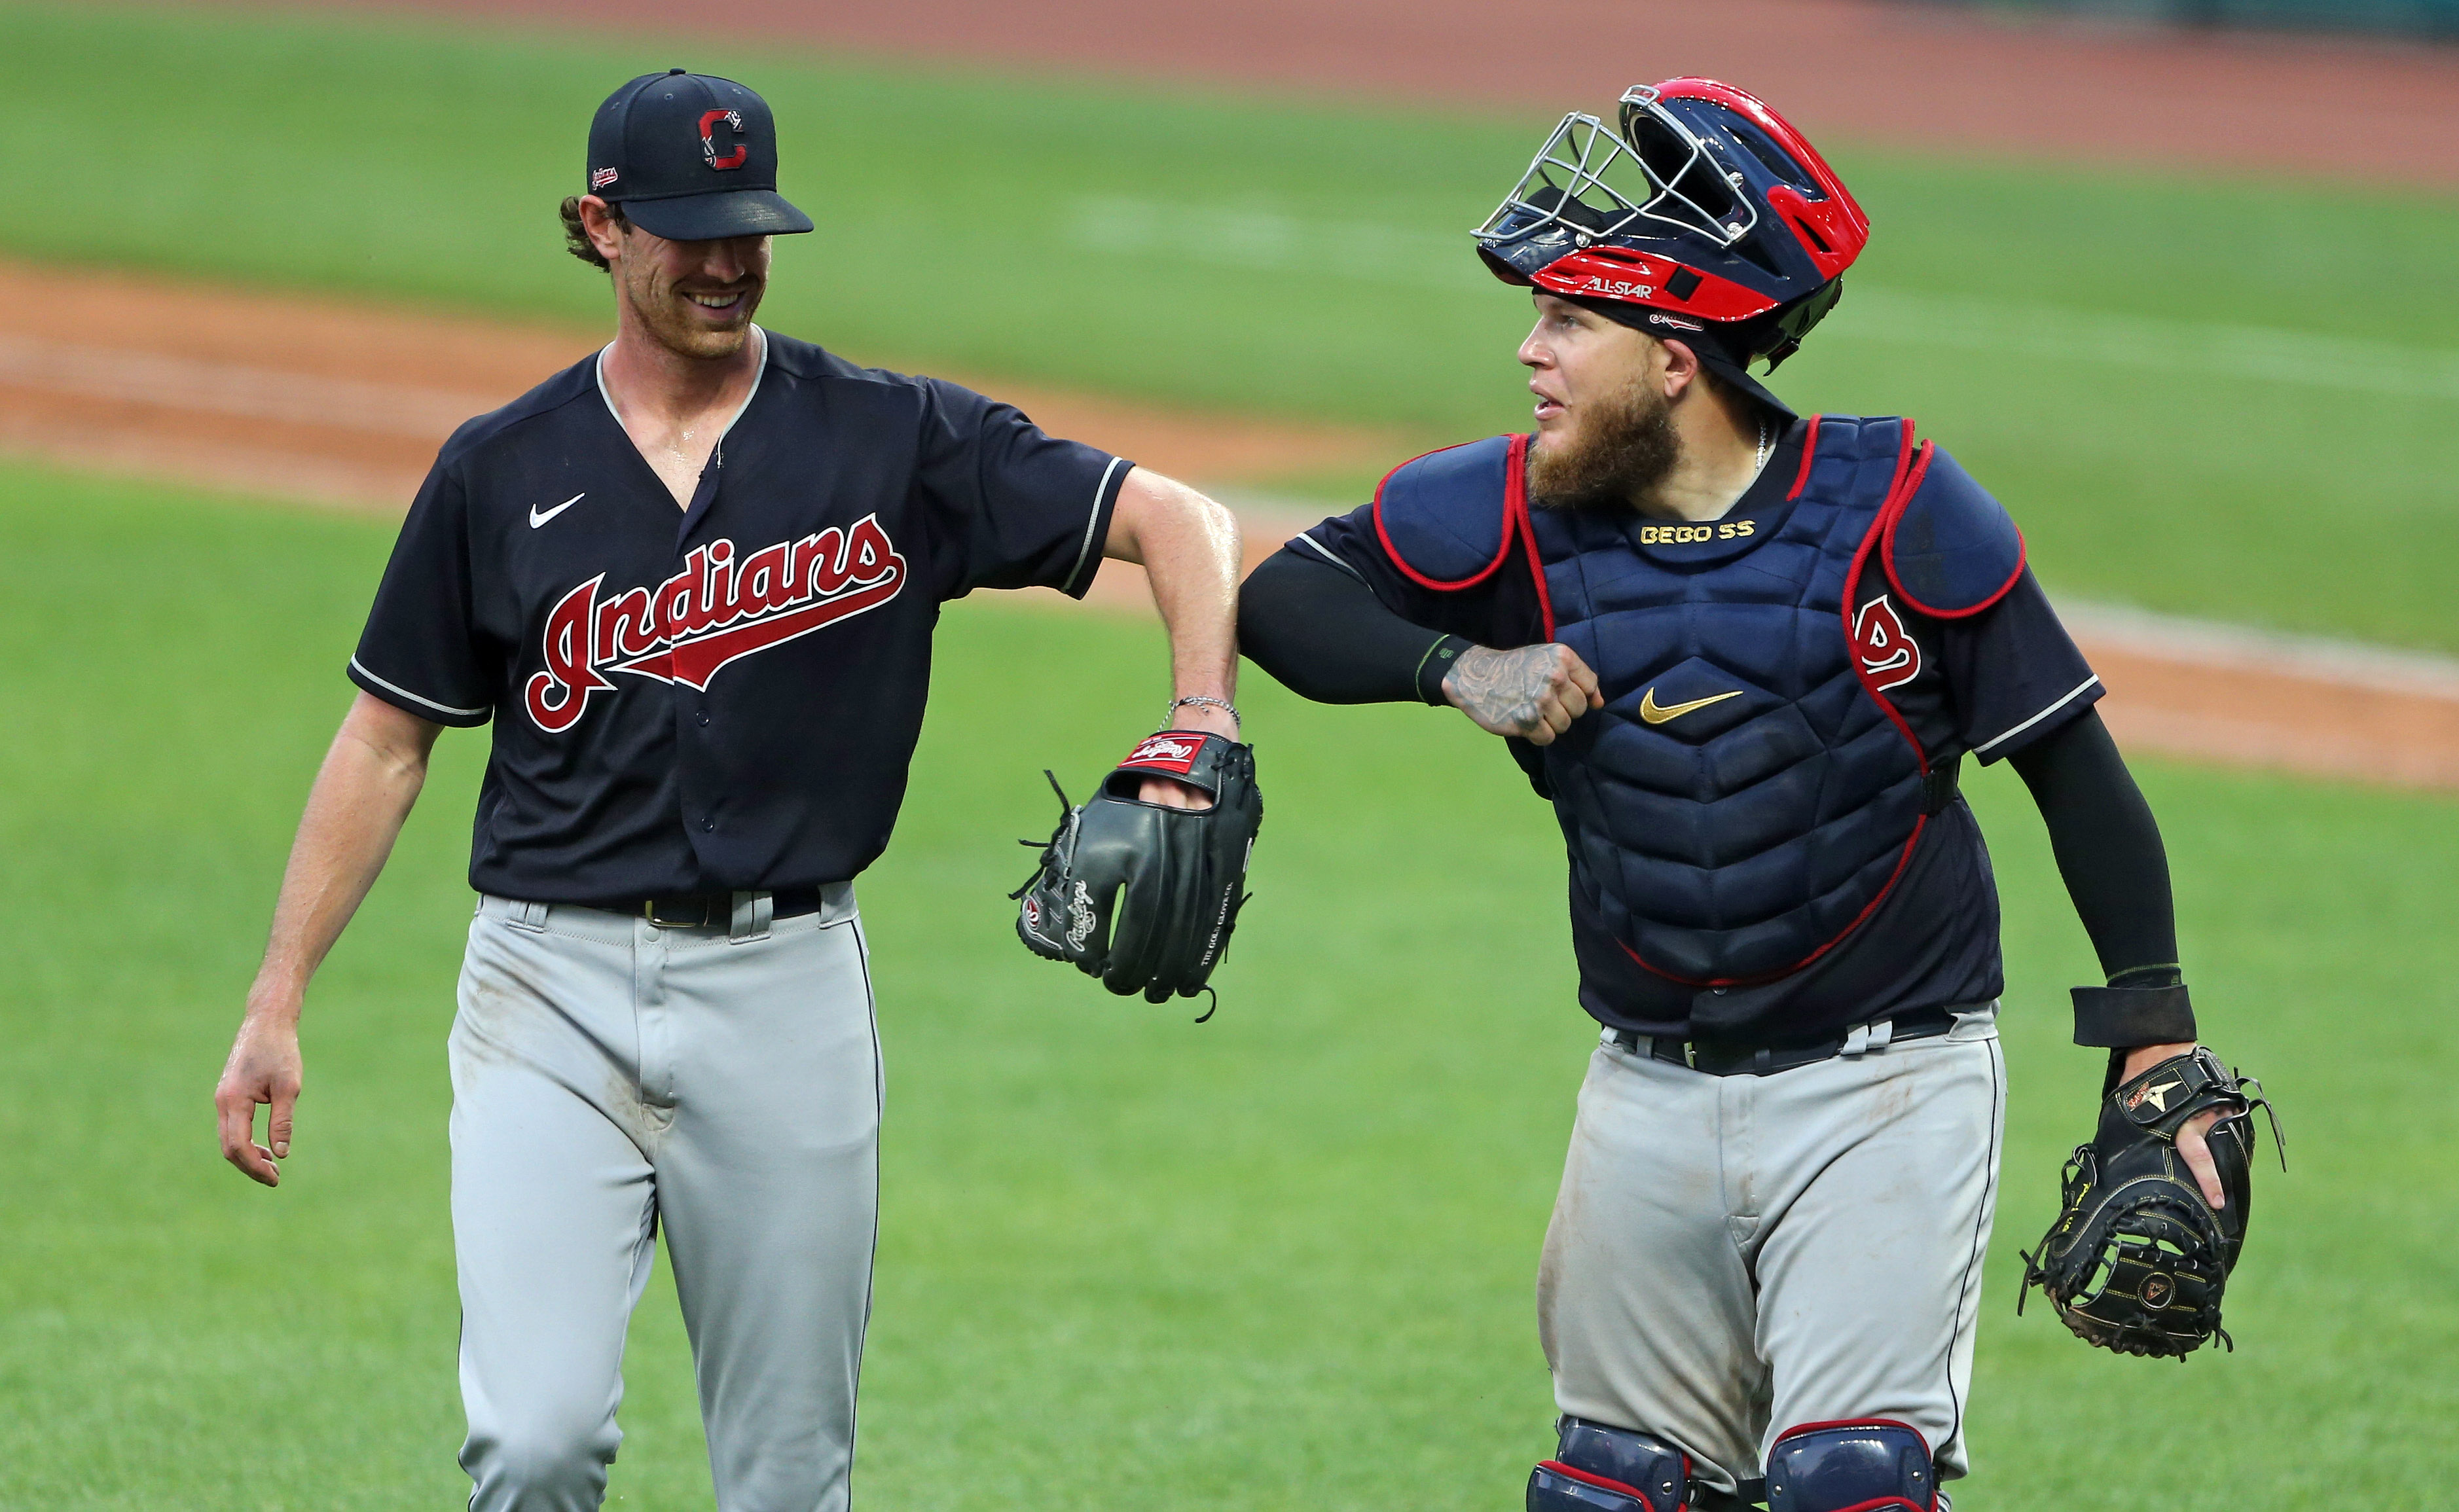 Should the Cleveland Indians change their name? 